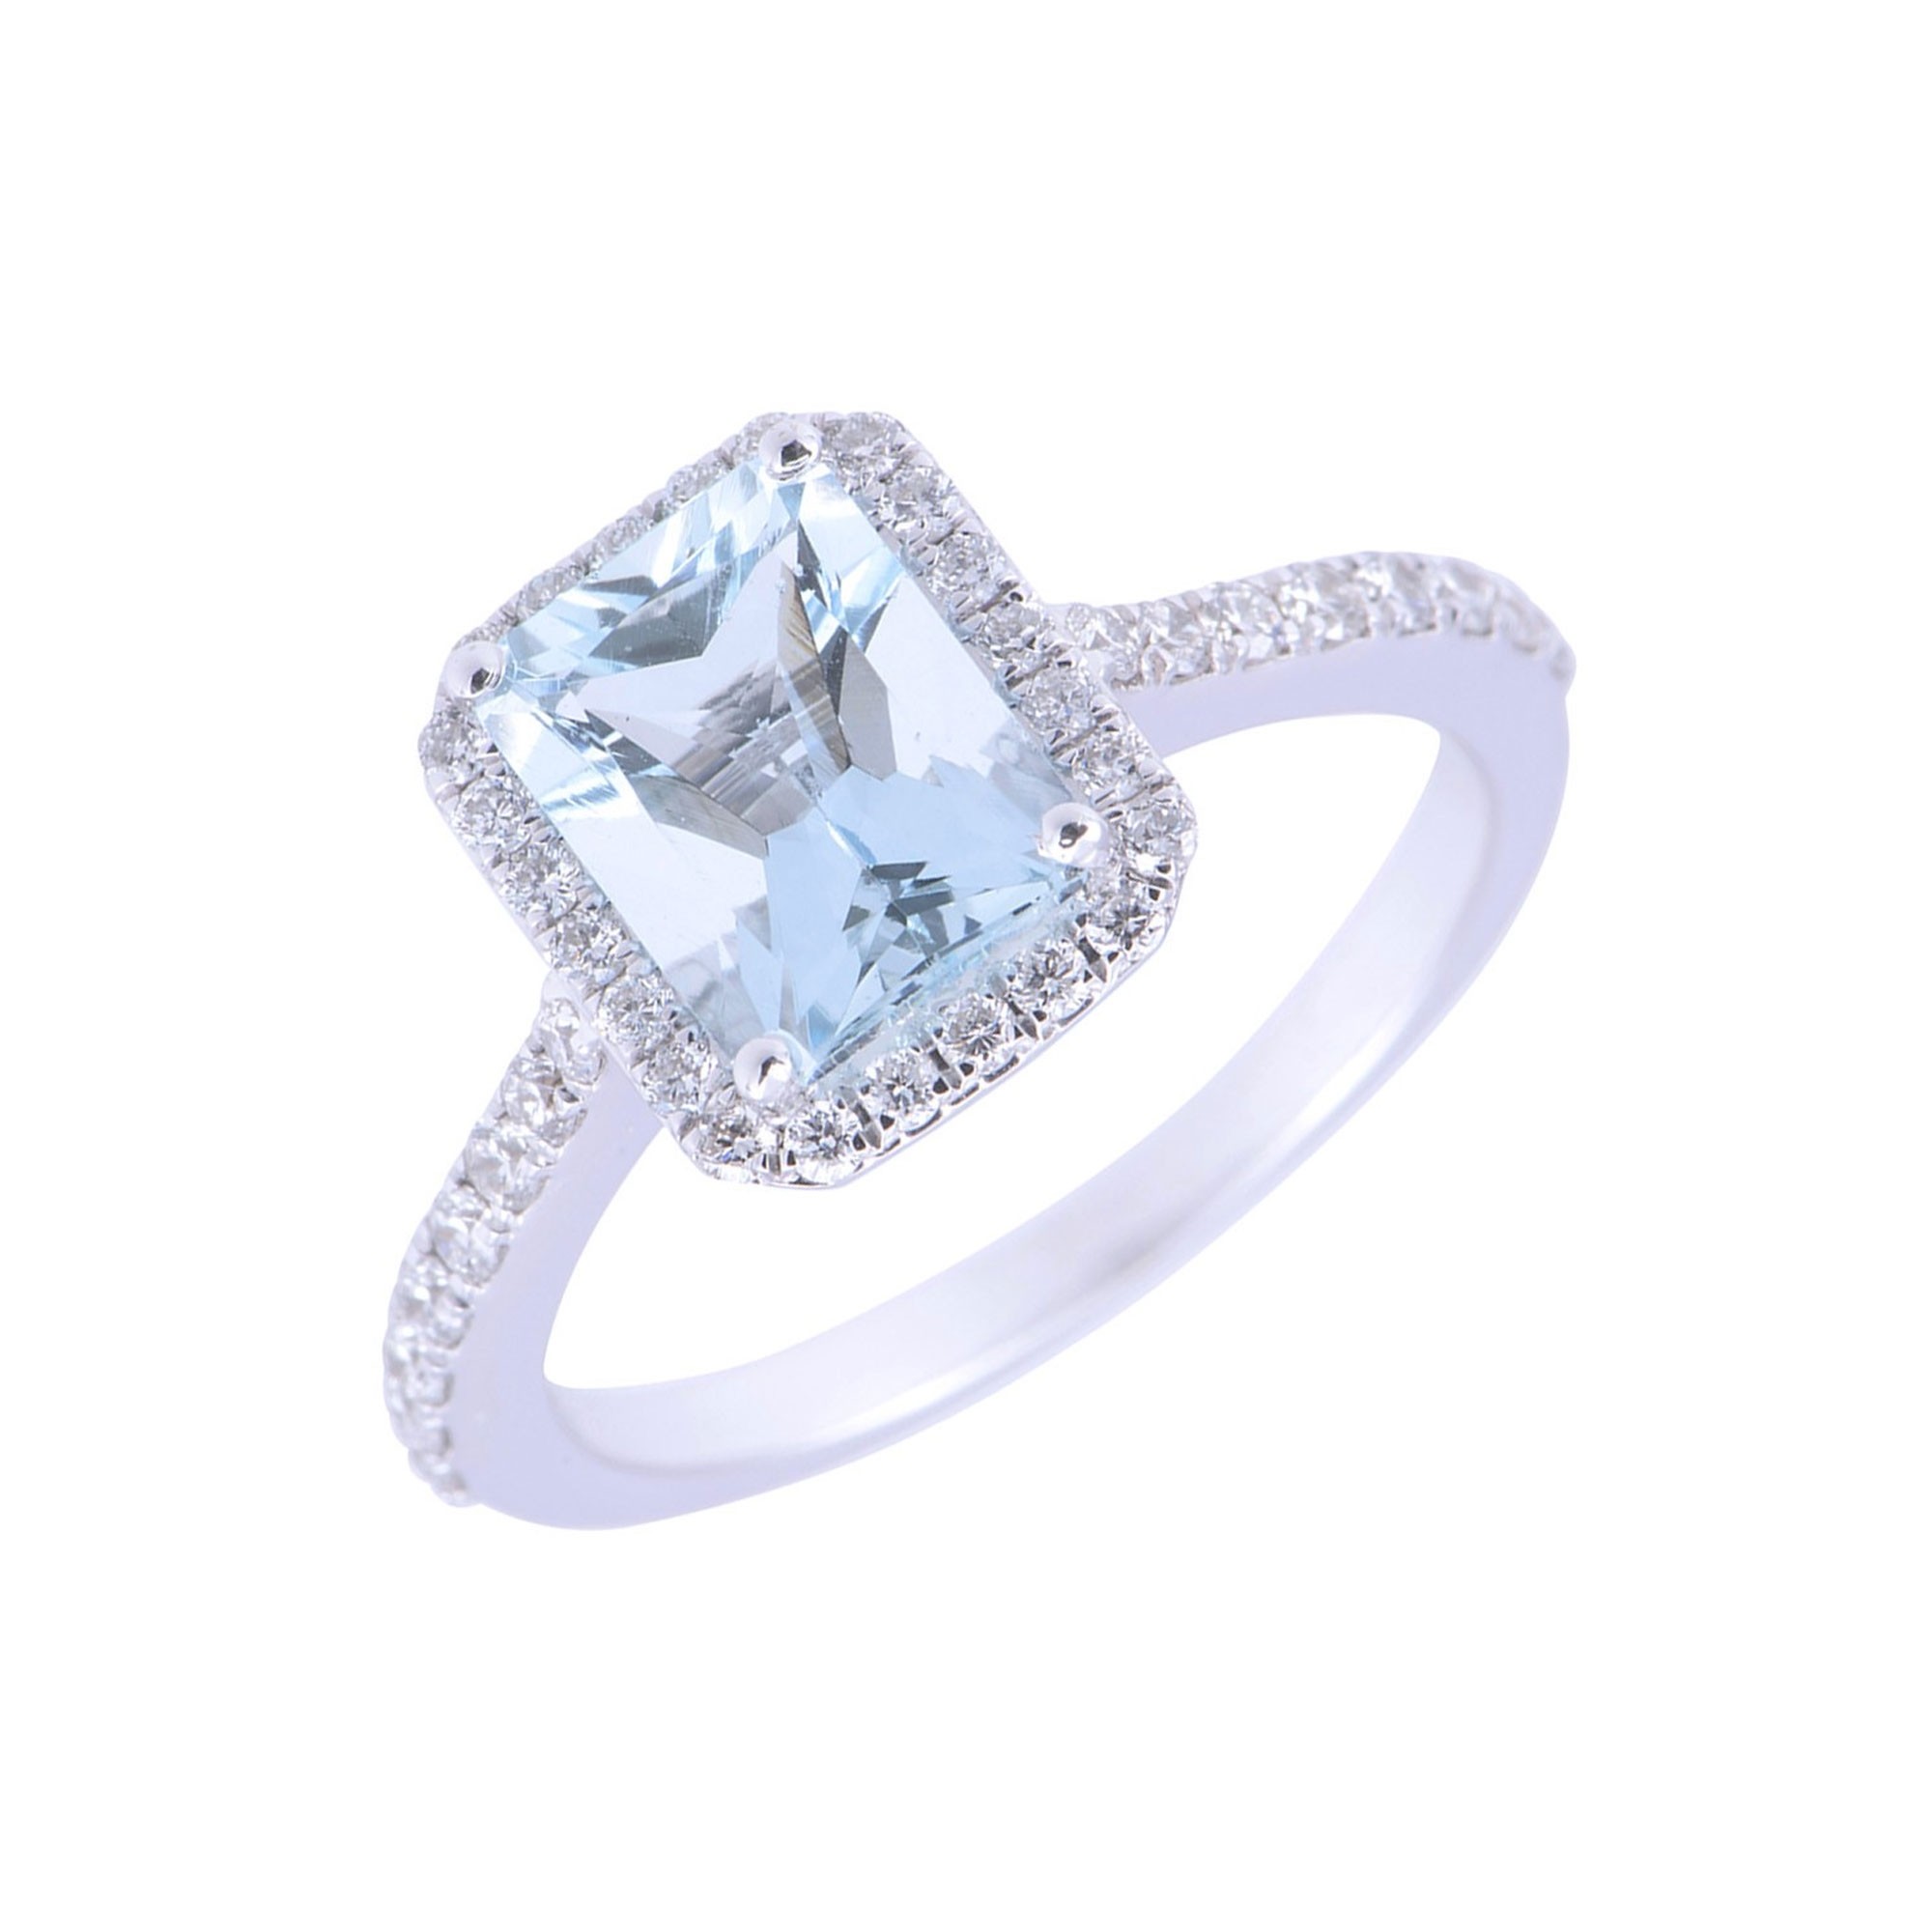 2 Cttw Jewel Zone US Cushion Cut Simulated Aquamarine Solitaire Ring in 10k Solid Gold